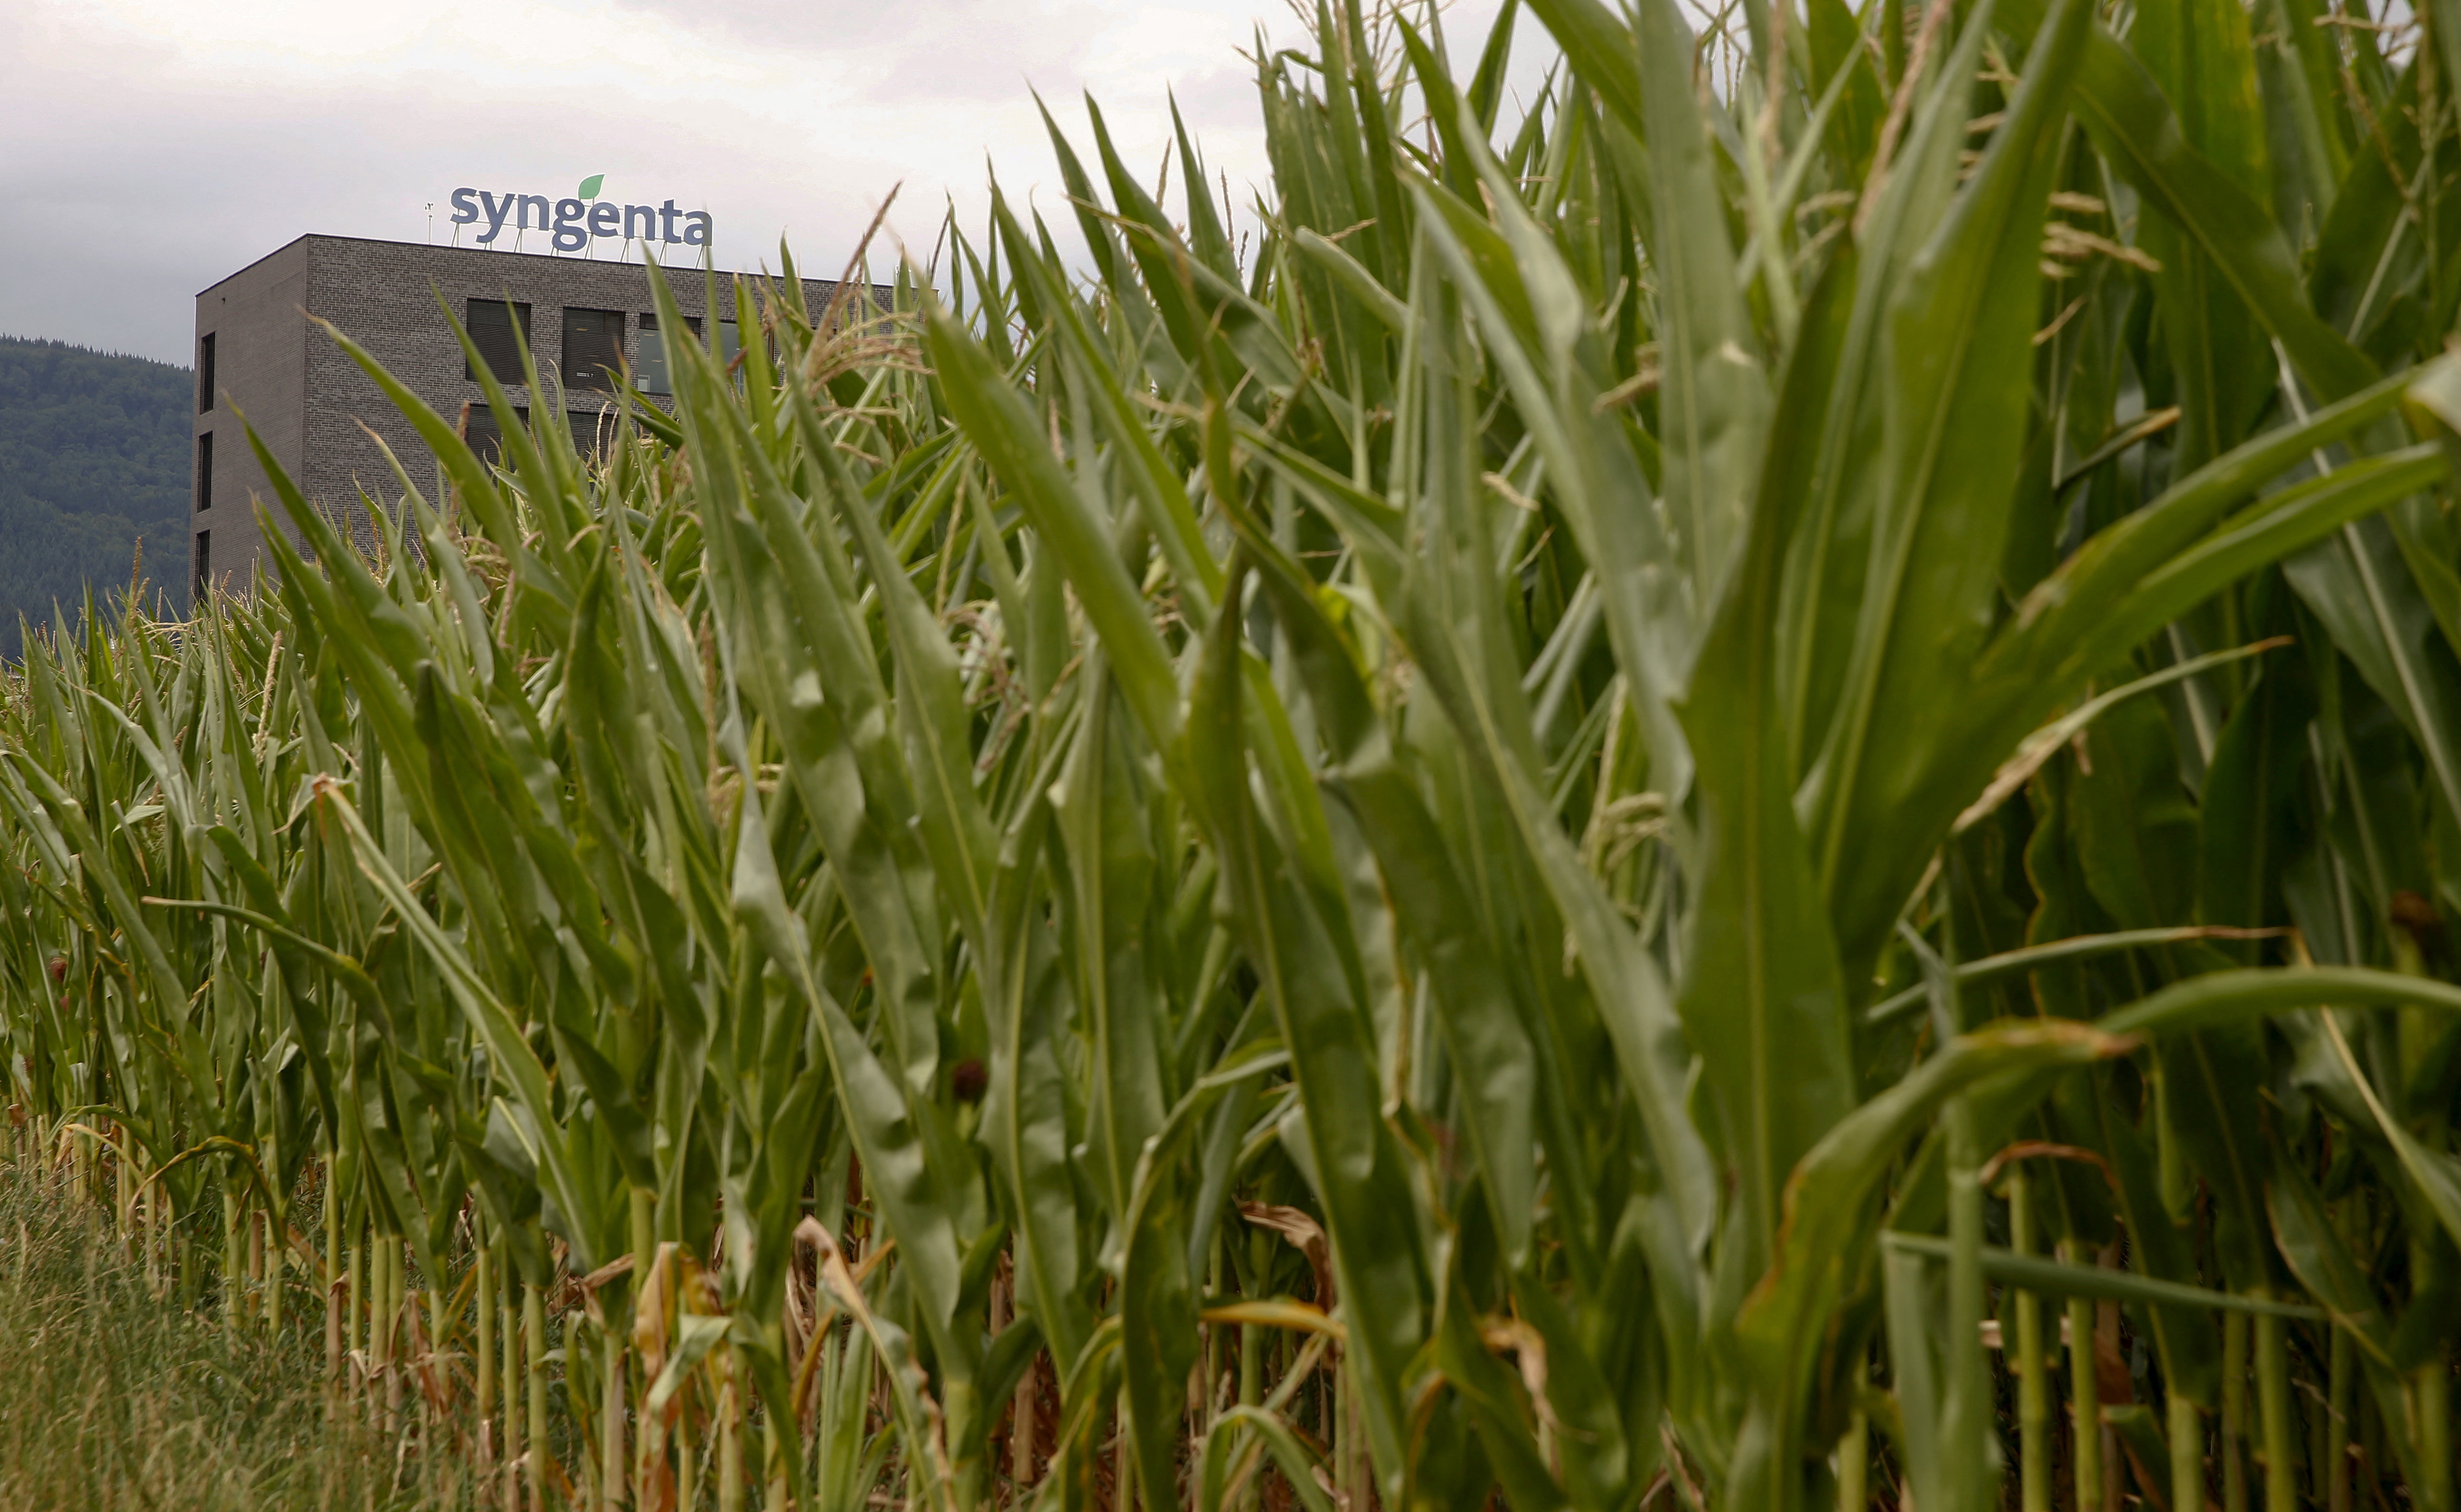 Corn grows on a field in front of a plant of Swiss agrochemicals maker Syngenta in the northern Swiss town of Stein